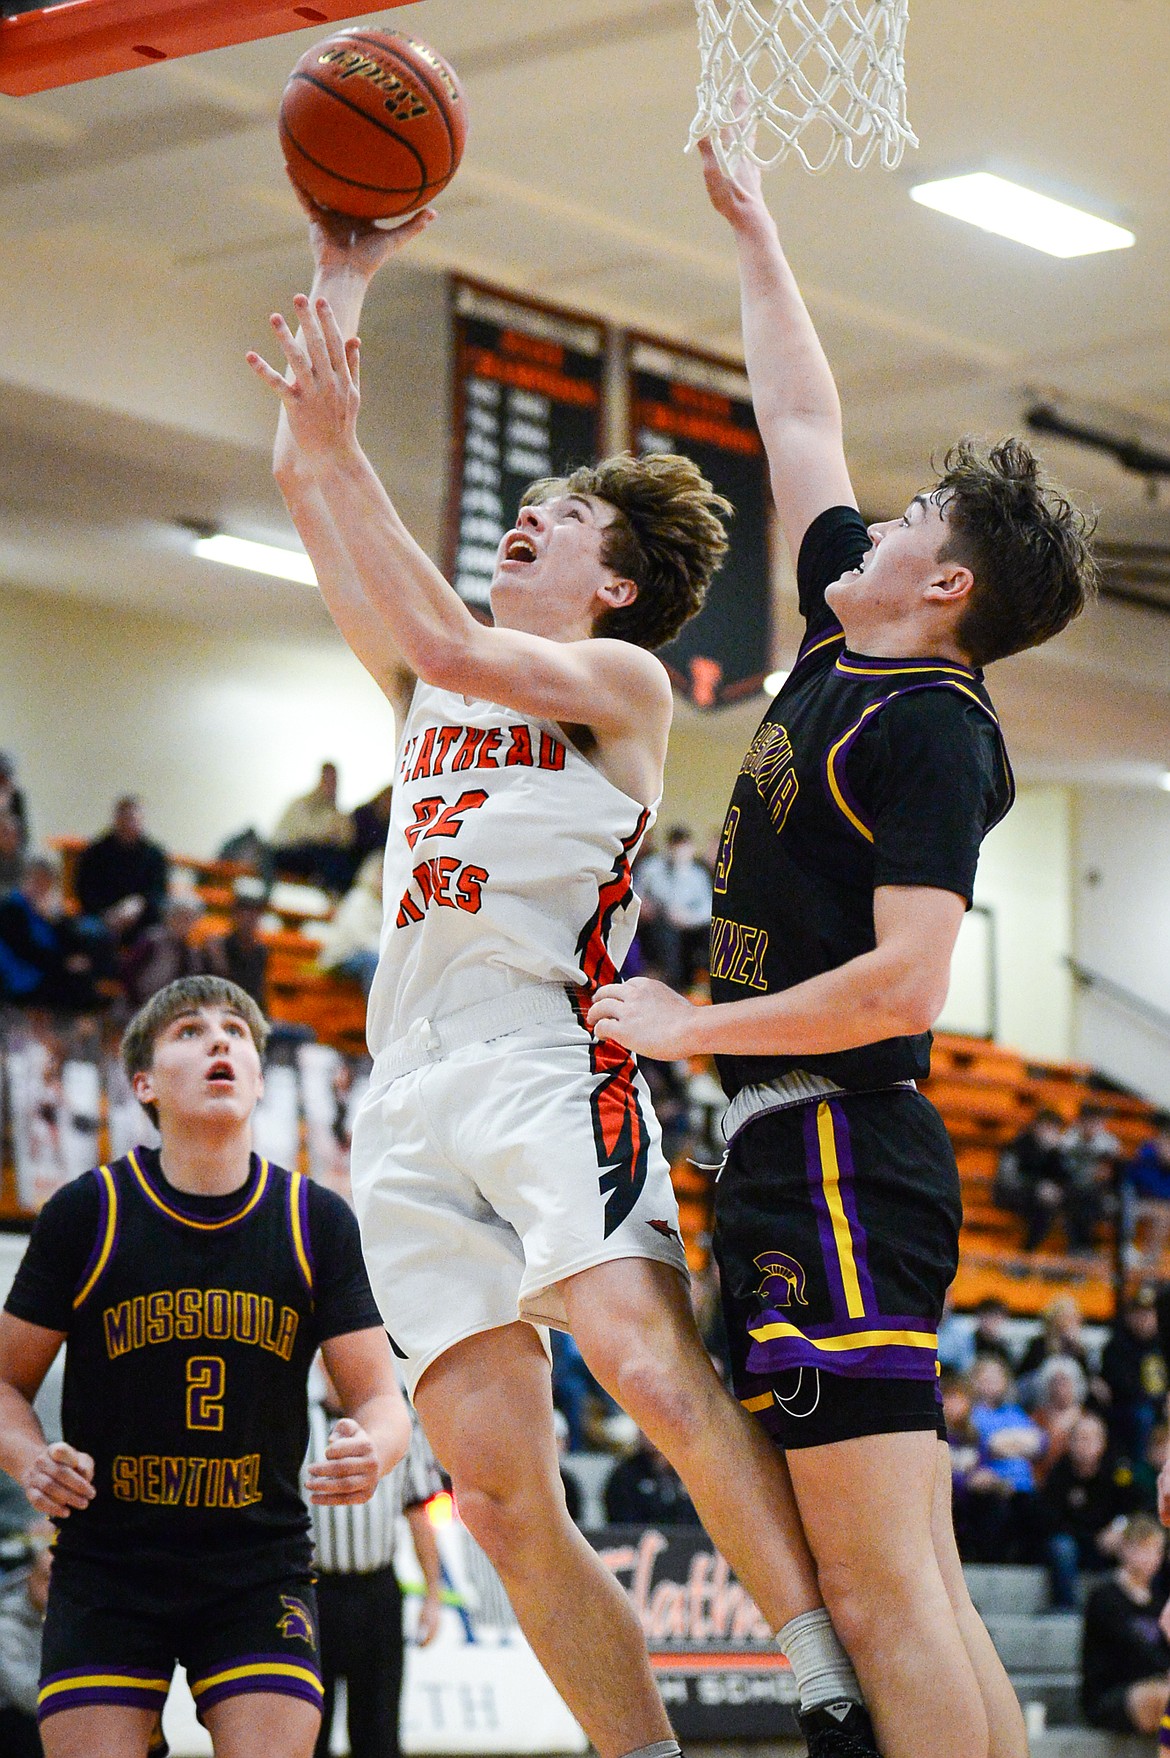 Flathead's Michael Manning (22) goes to the basket in the fourth quarter against Missoula Sentinel at Flathead High School on Friday, Feb. 3. (Casey Kreider/Daily Inter Lake)